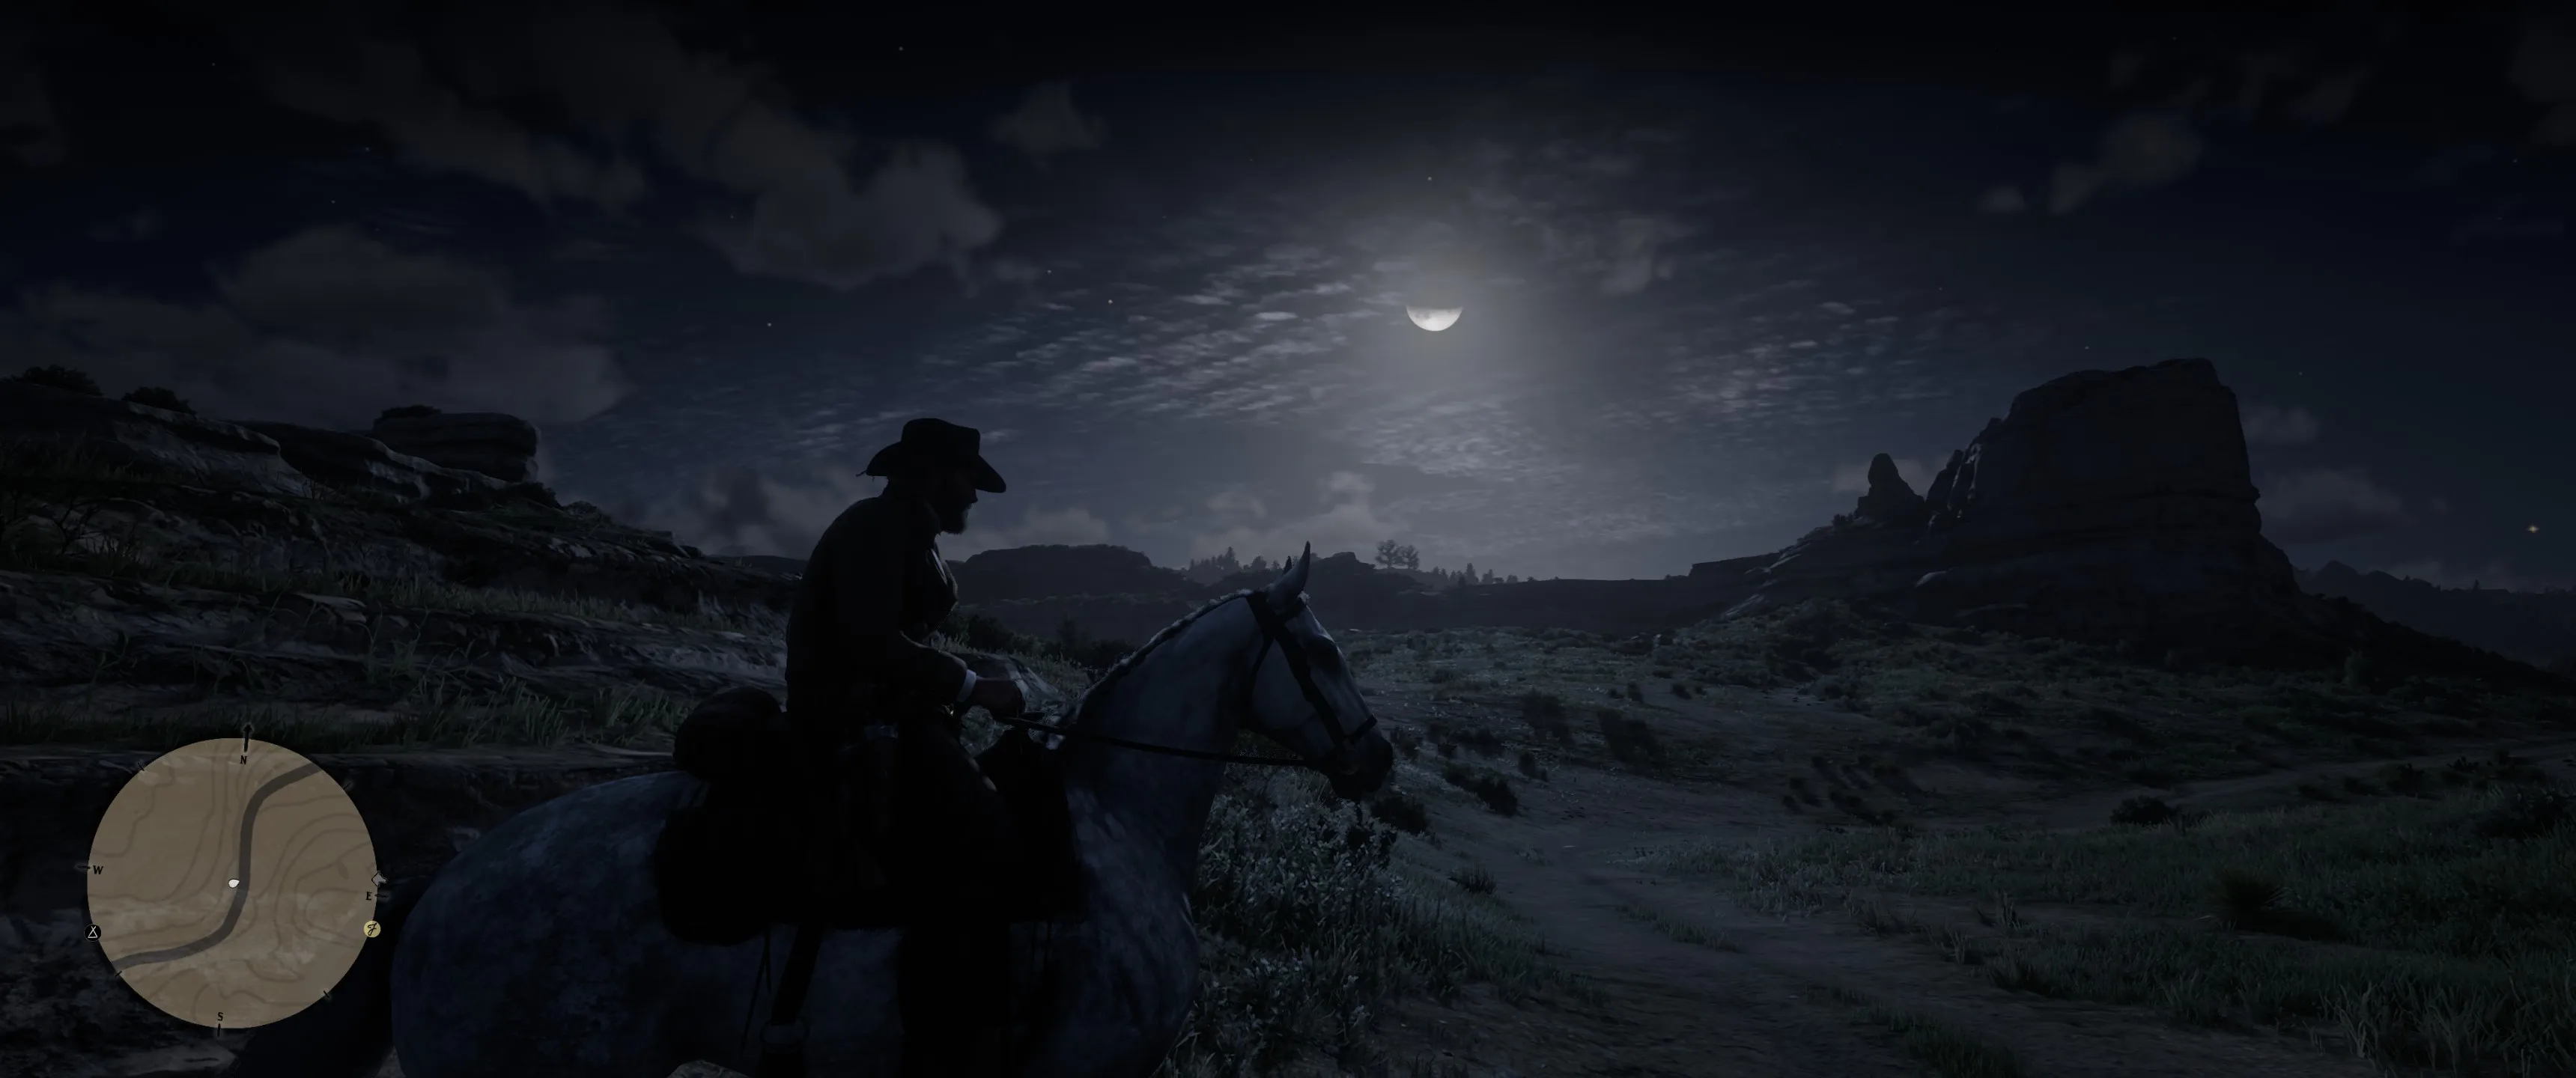 Night time riding is a completely different experience